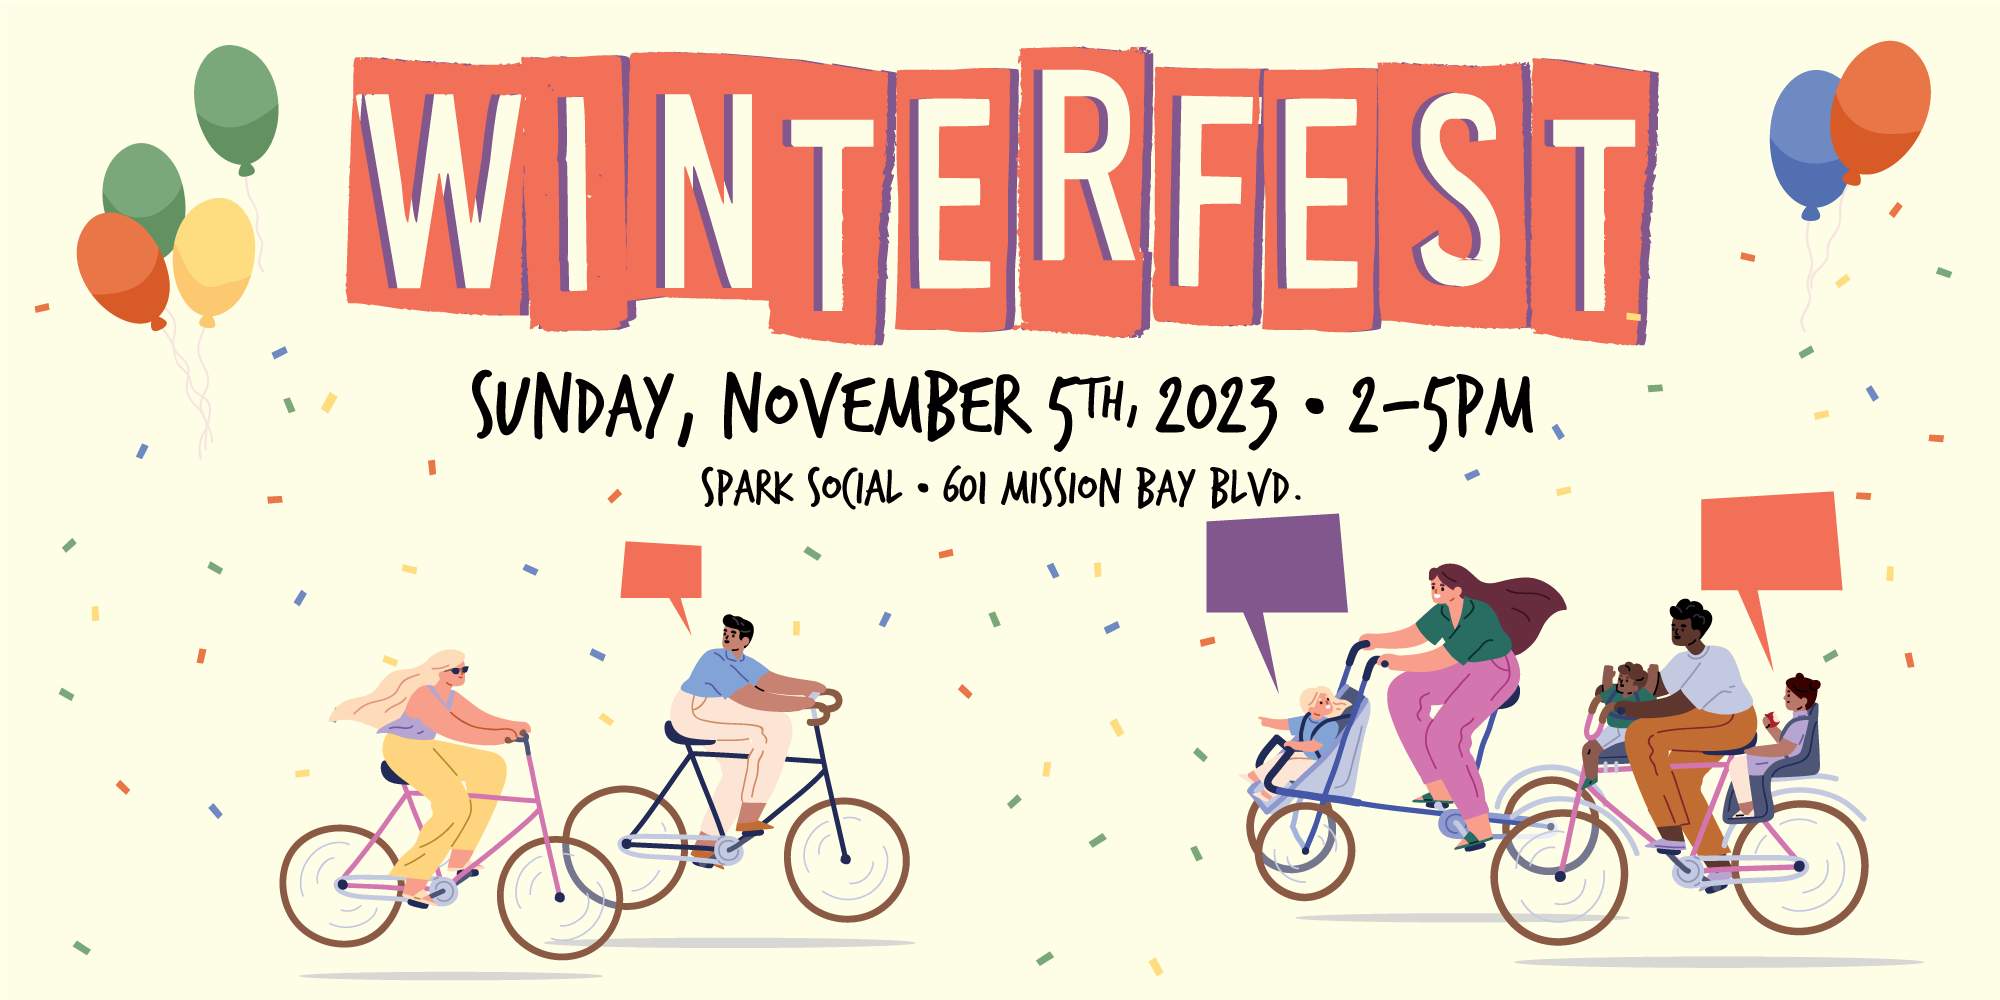 Celebrate with us at Winterfest 2023!